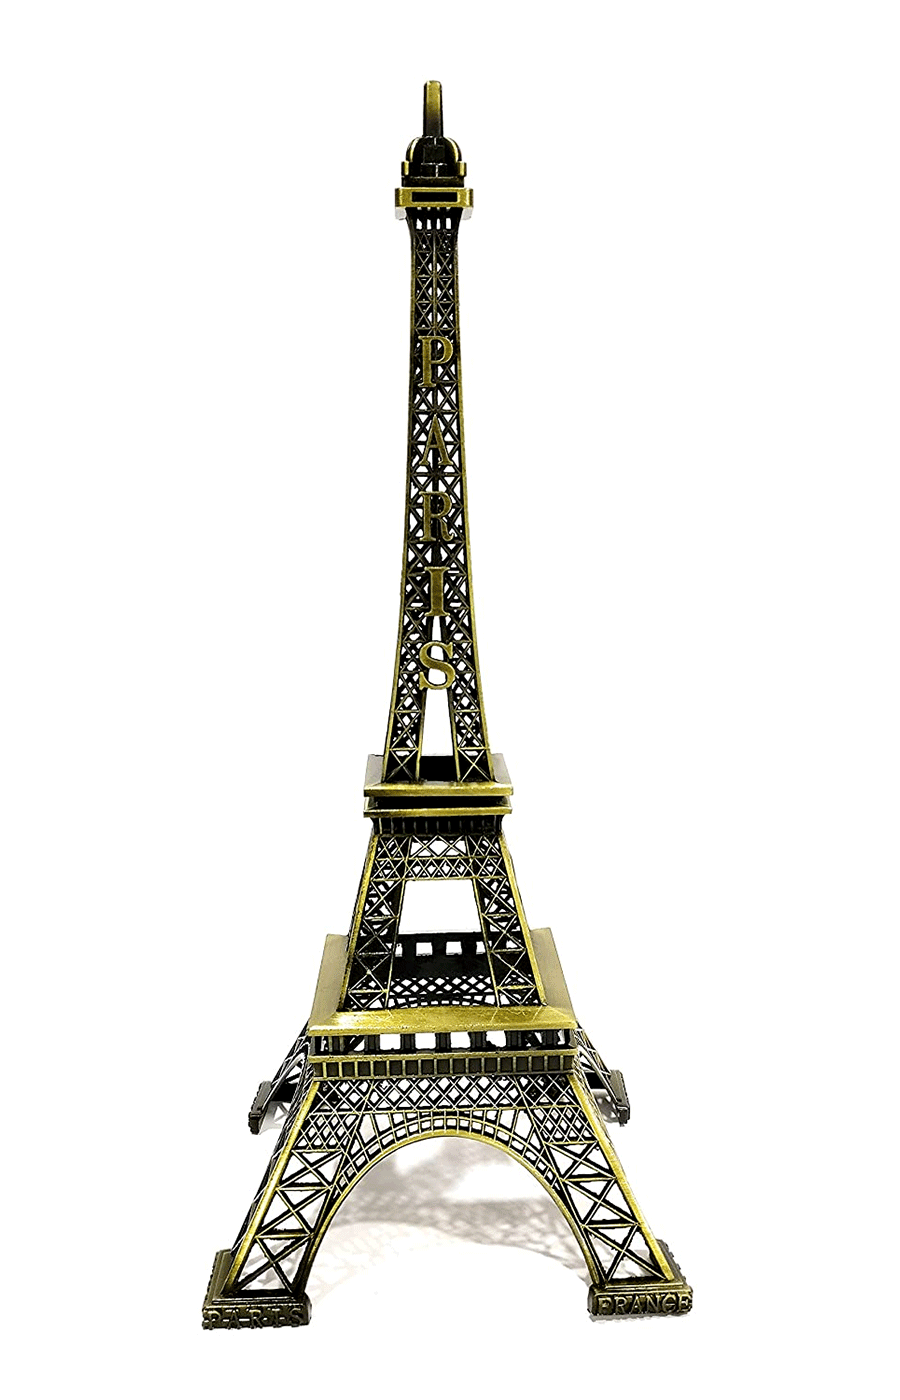 FunkyTradition 33 CM Tall Eiffel Tower Statue Metal Showpiece | Birthday Anniversary Gift and Home Office Decor 13" Tall